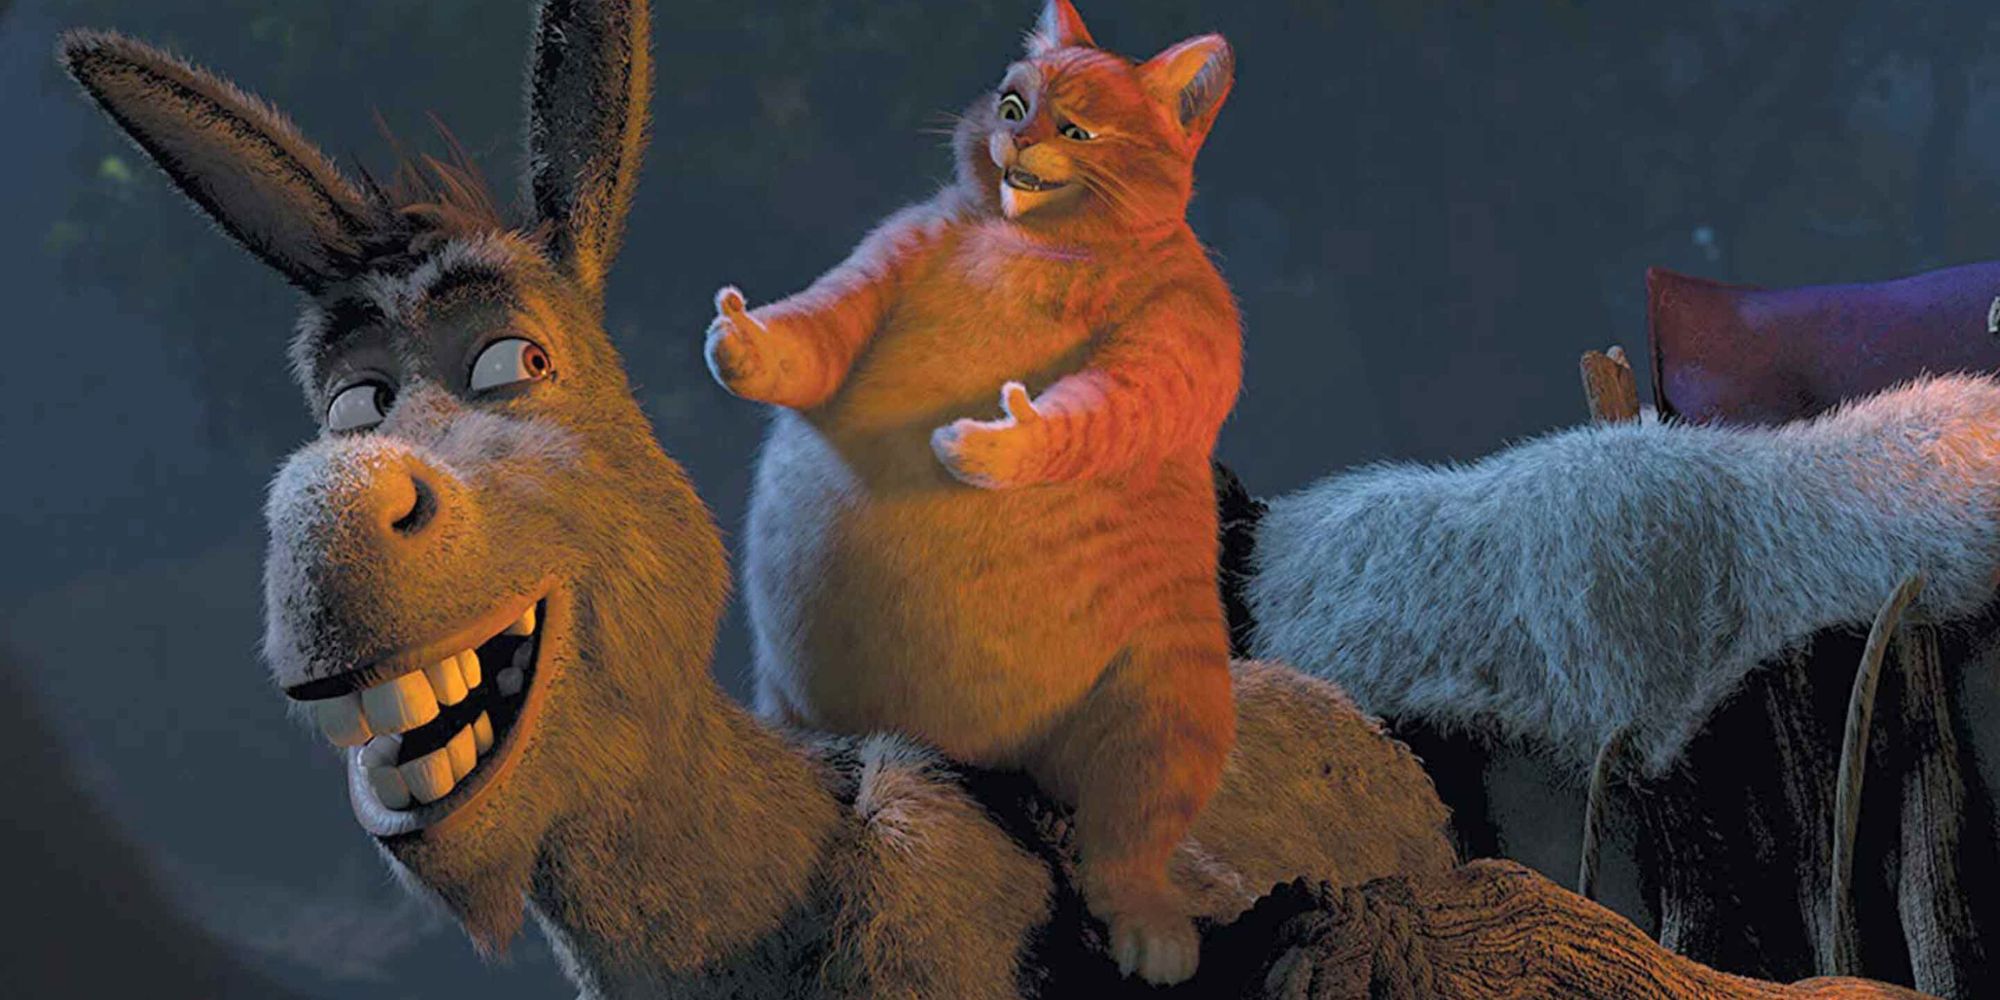 Donkey looking back at Puss who is sitting on his back in Shrek Forever After